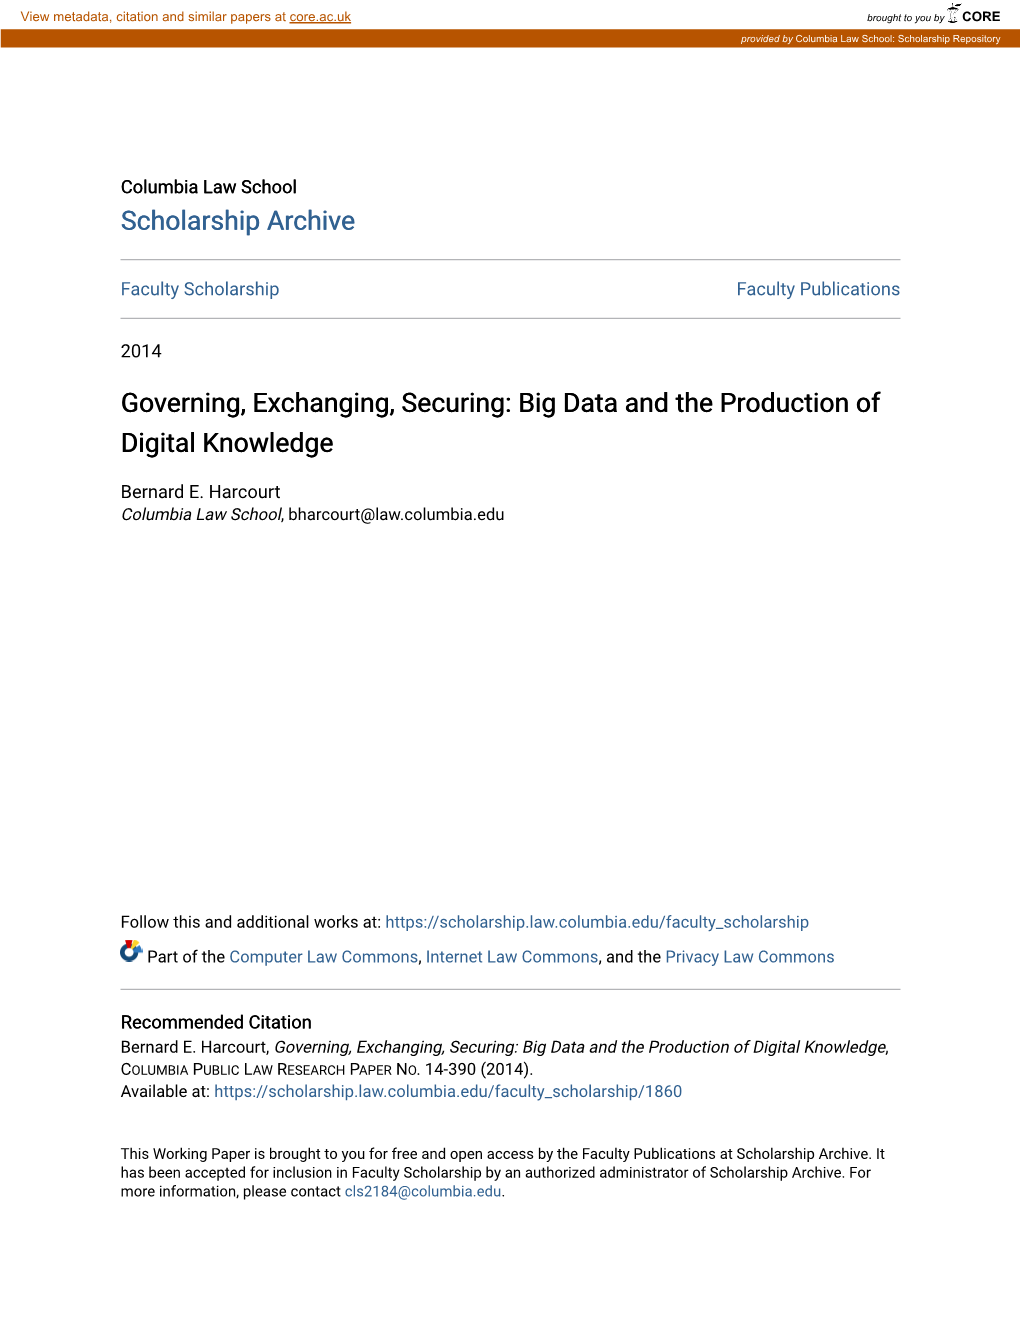 Governing, Exchanging, Securing: Big Data and the Production of Digital Knowledge